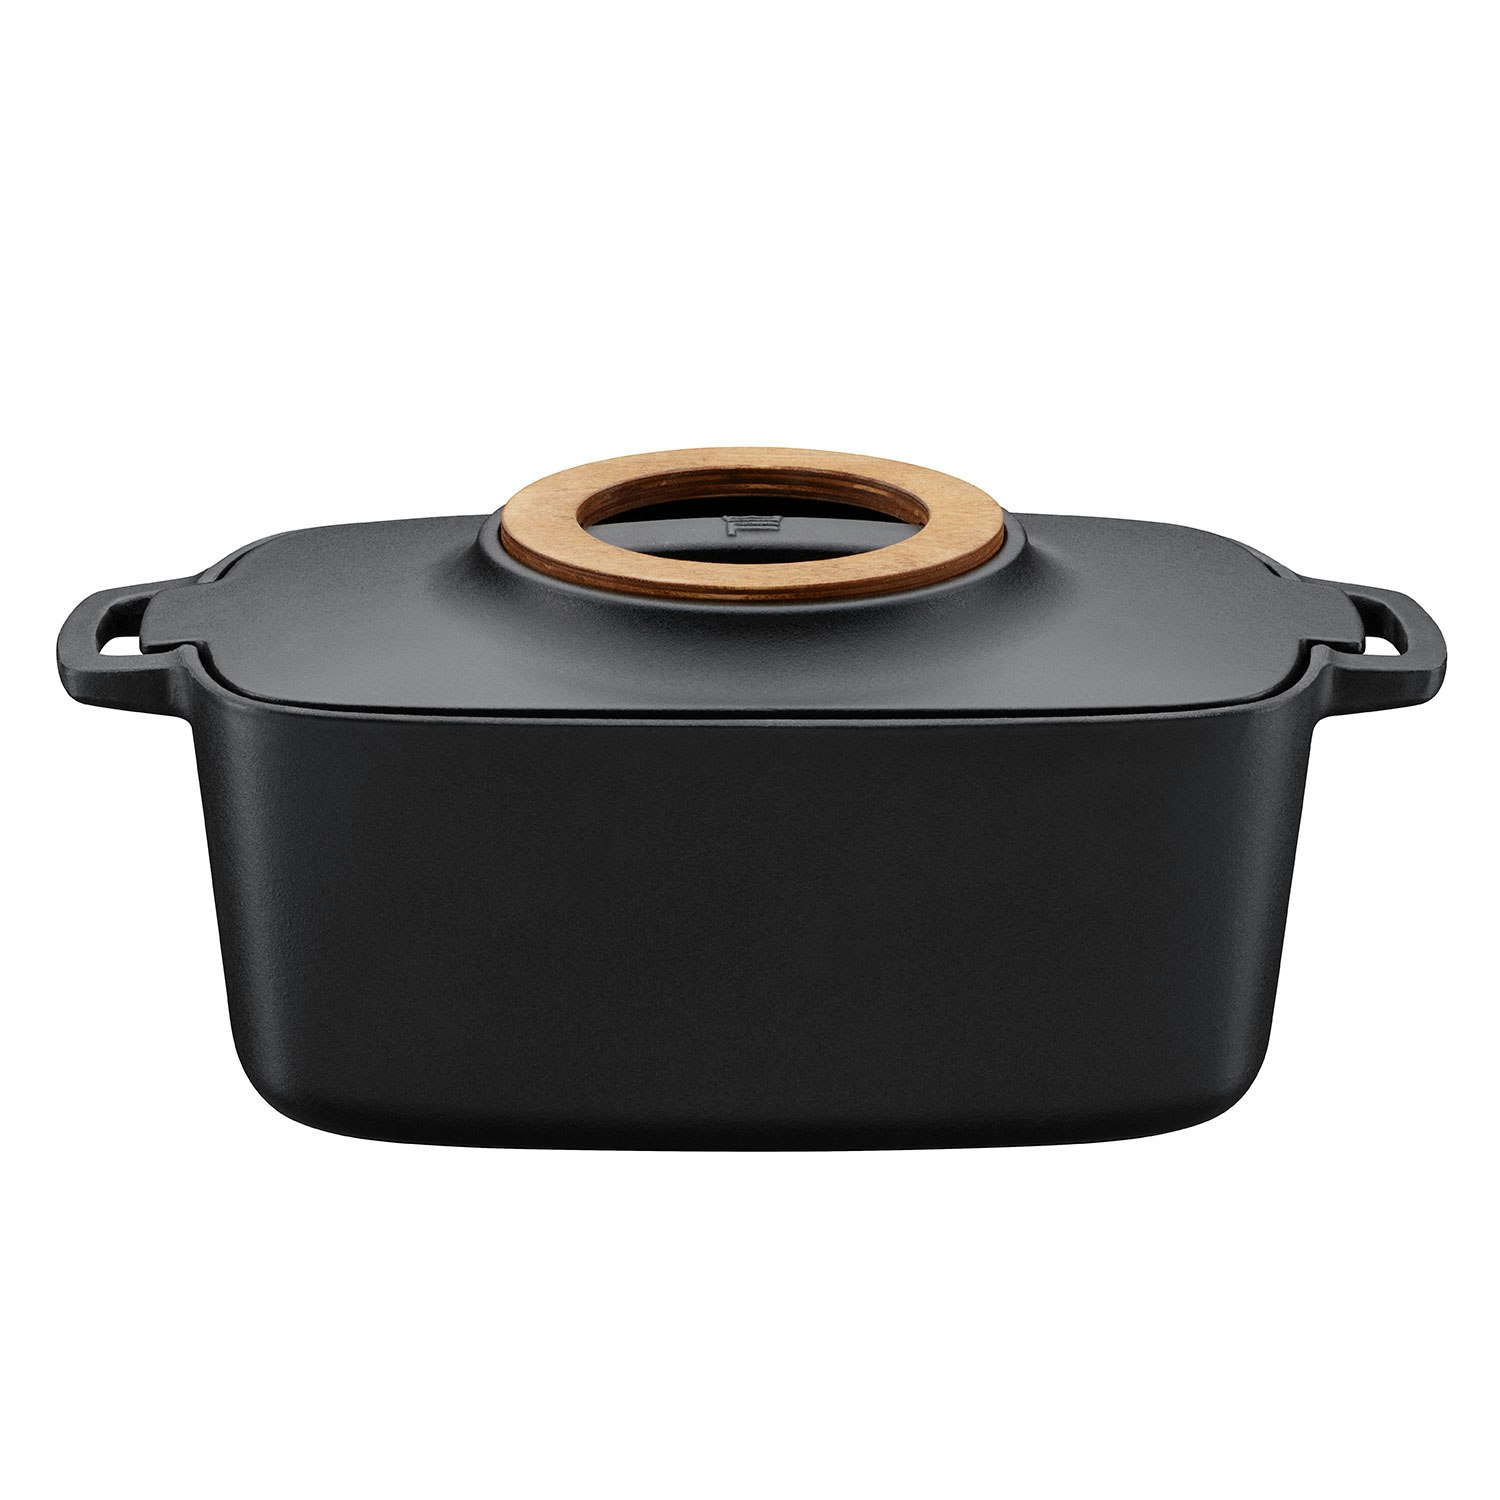 Natural Elements Low Casserole- Says oven safe to 300? : r/castiron